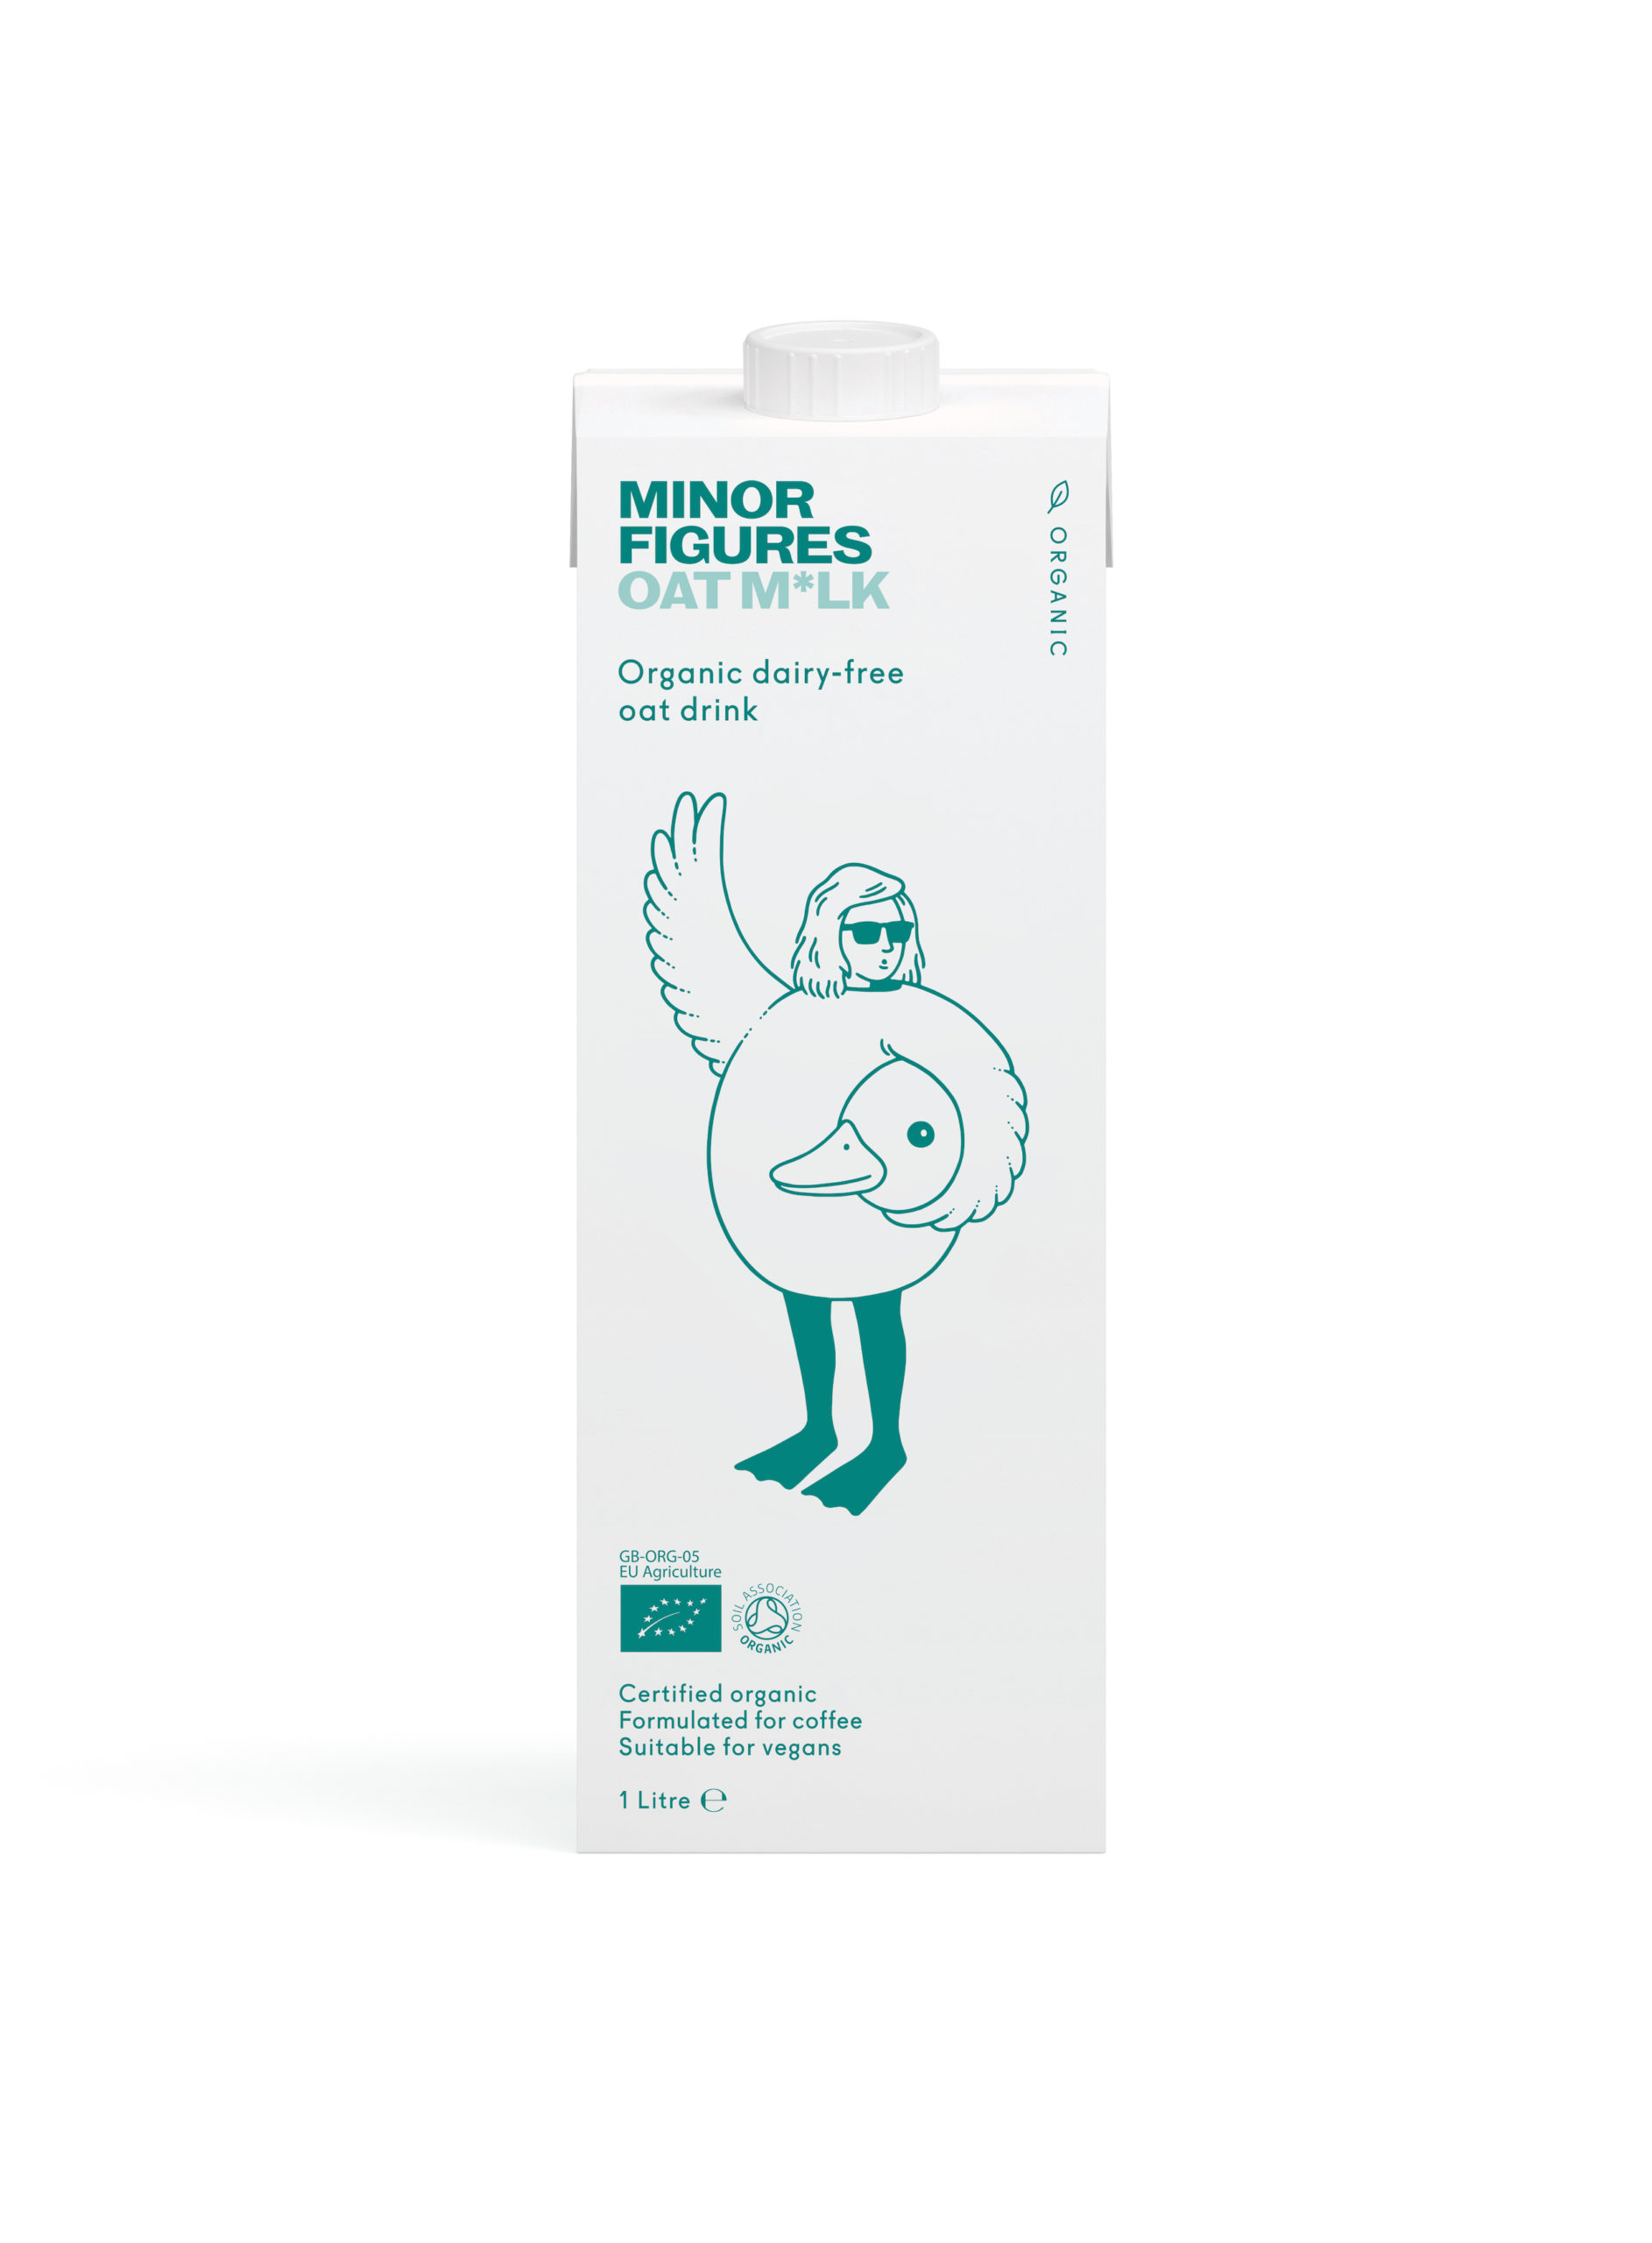 Organic products from Minor Figures